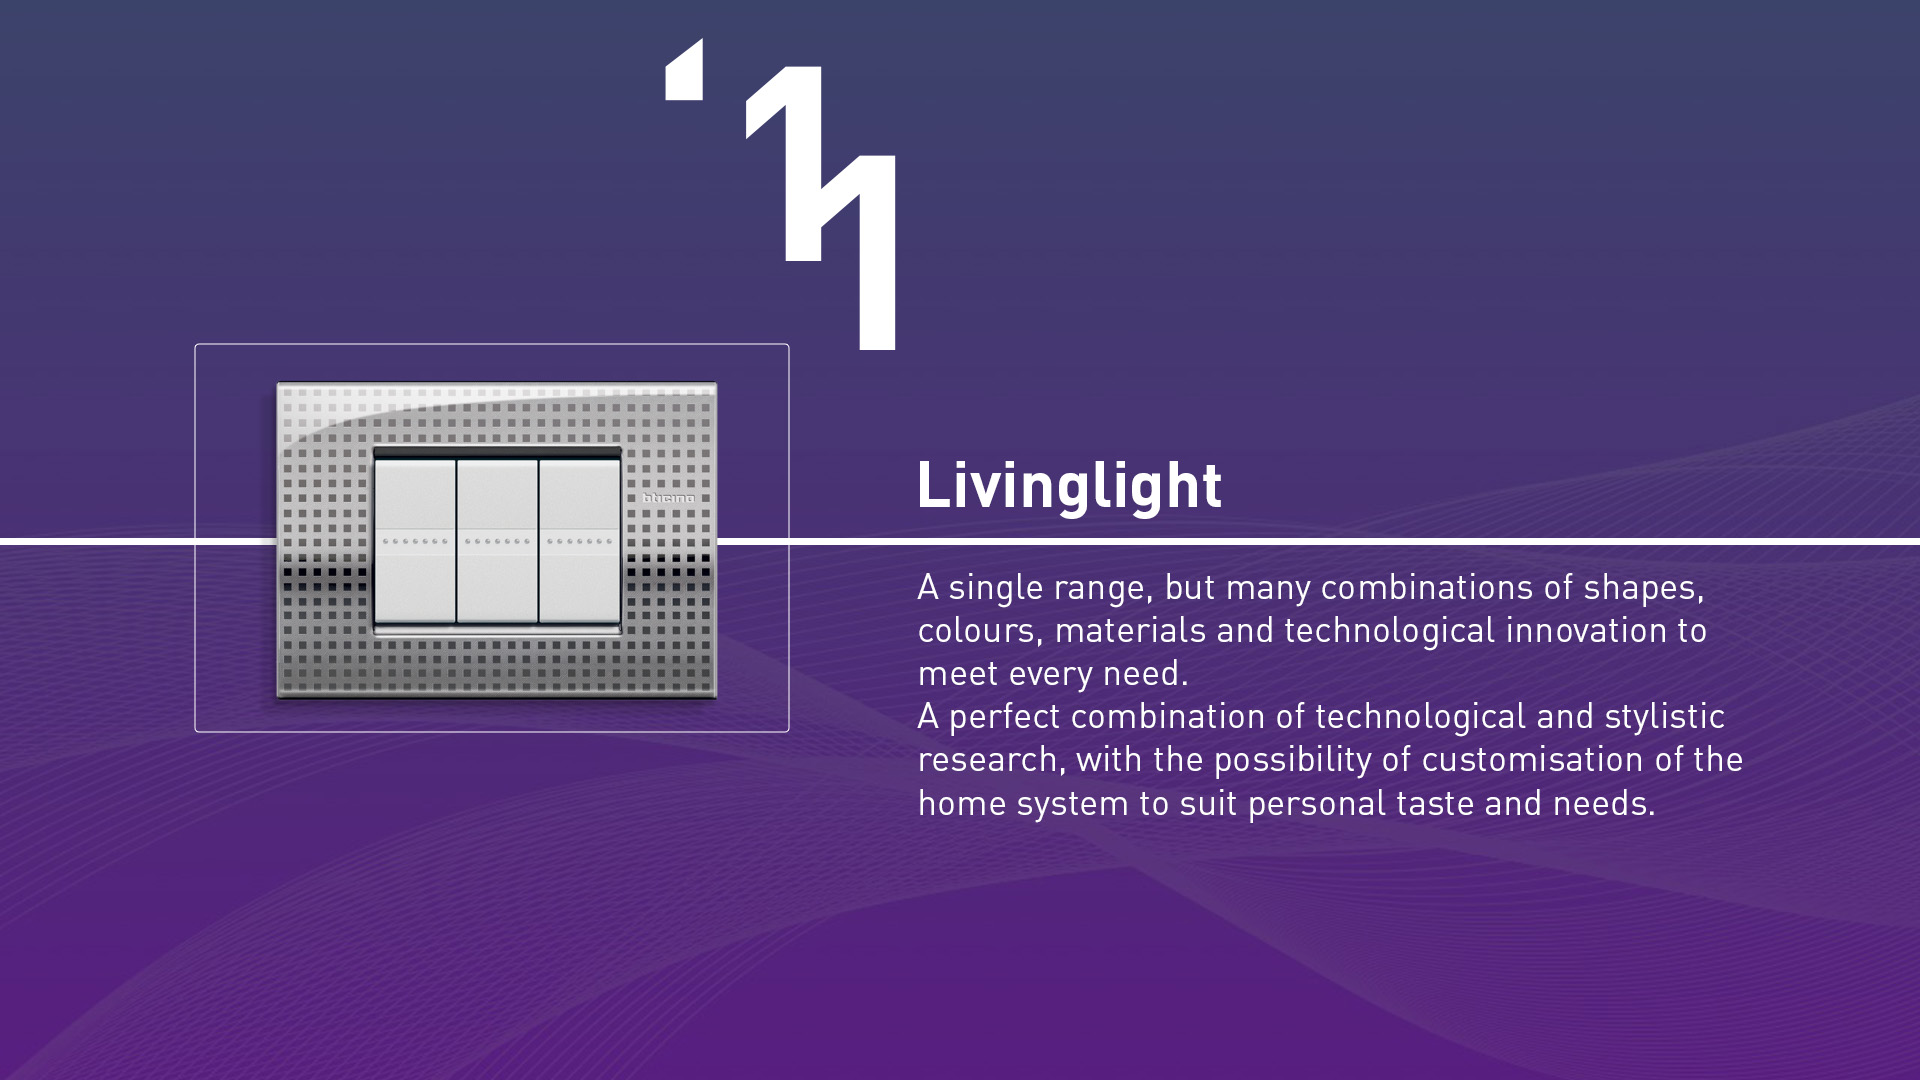 Livinglight (2011). A single range, but many combinations of shapes, colours, materials, and technological innovation, and many possibilities of customising the home system